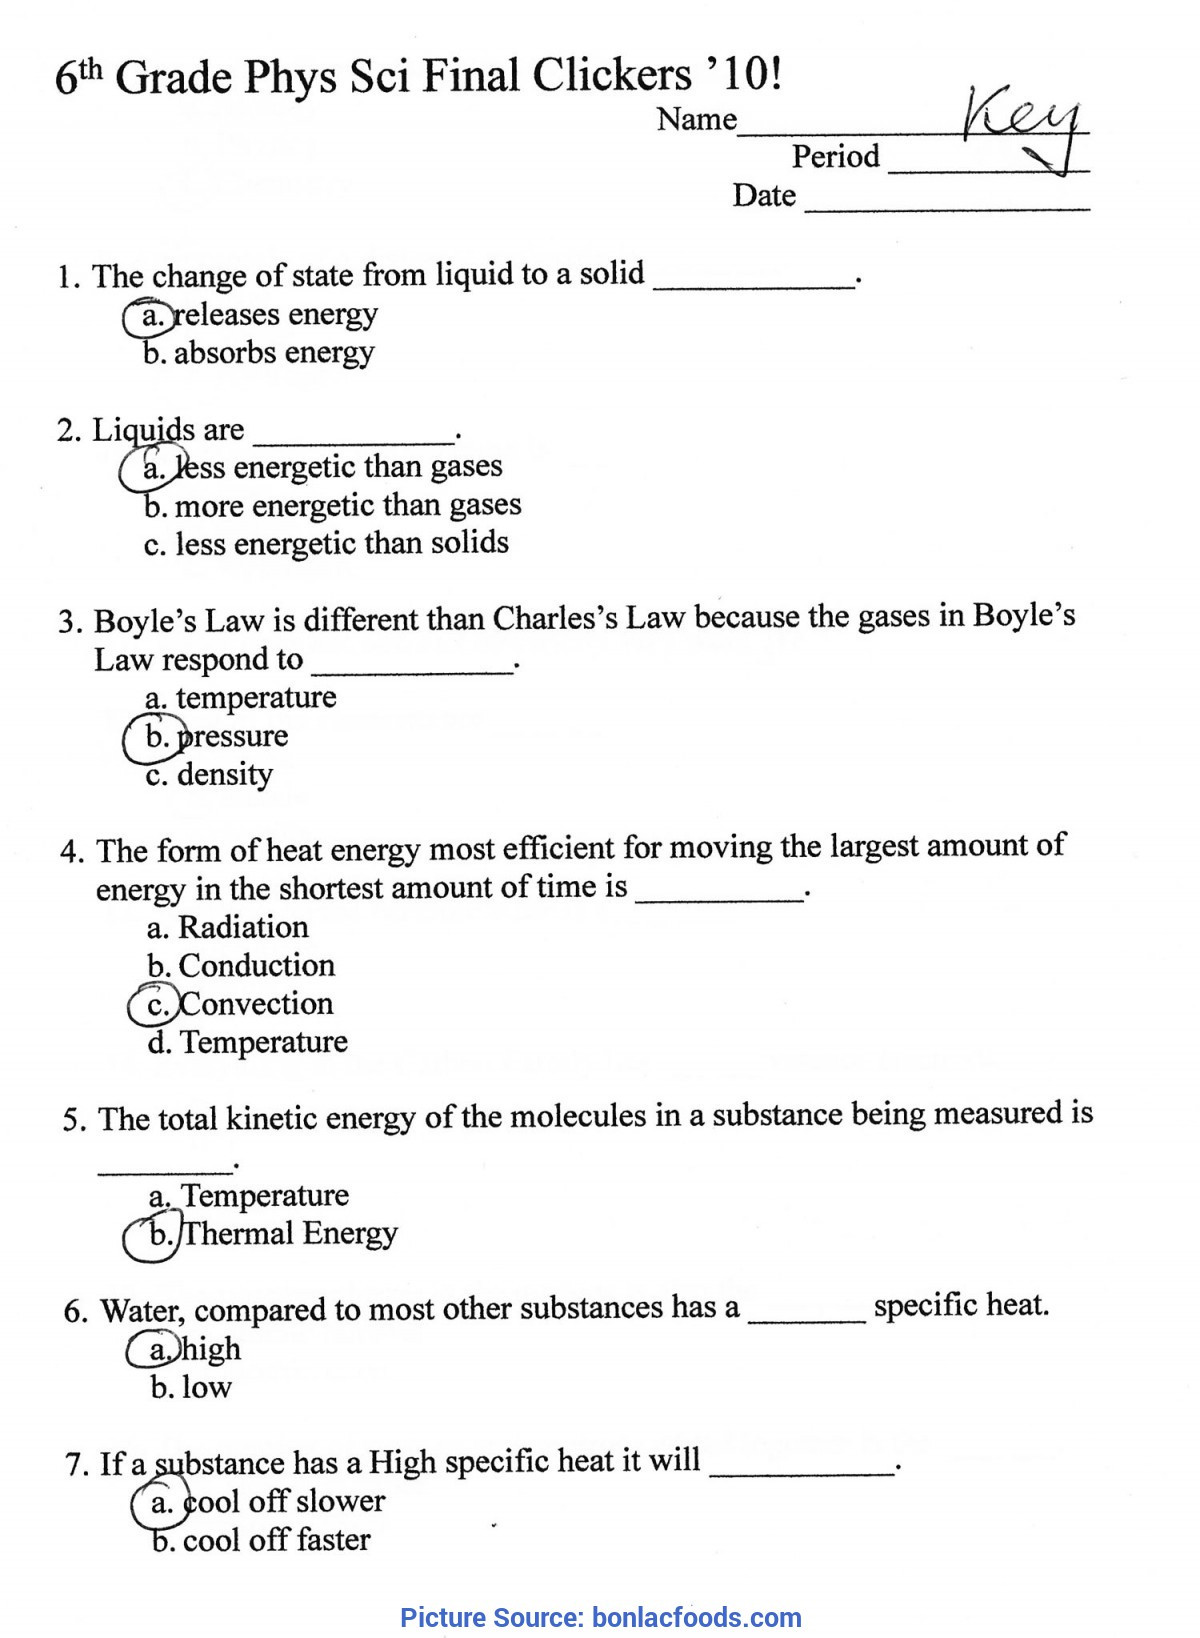 6th Grade Science Worksheets Briliant 6th Grade Science Lessons Free Worksheets for All